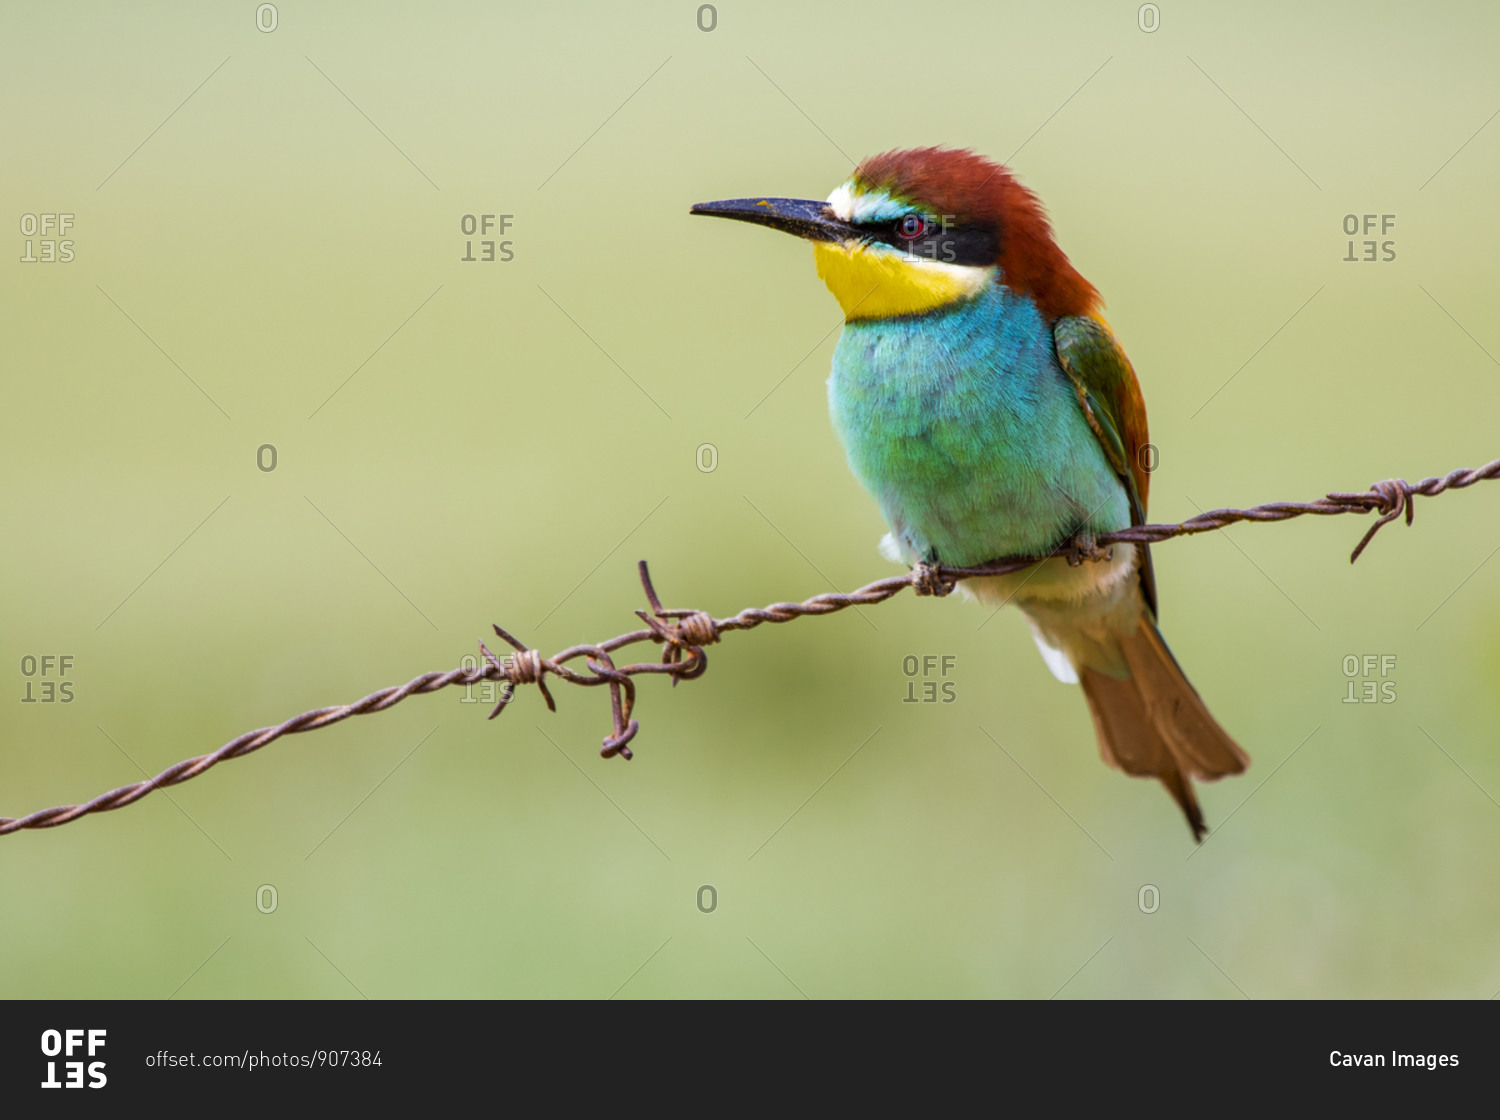 European bee-eater, Merops apiaster, beautiful colorful bird sitting on a barbed wire.